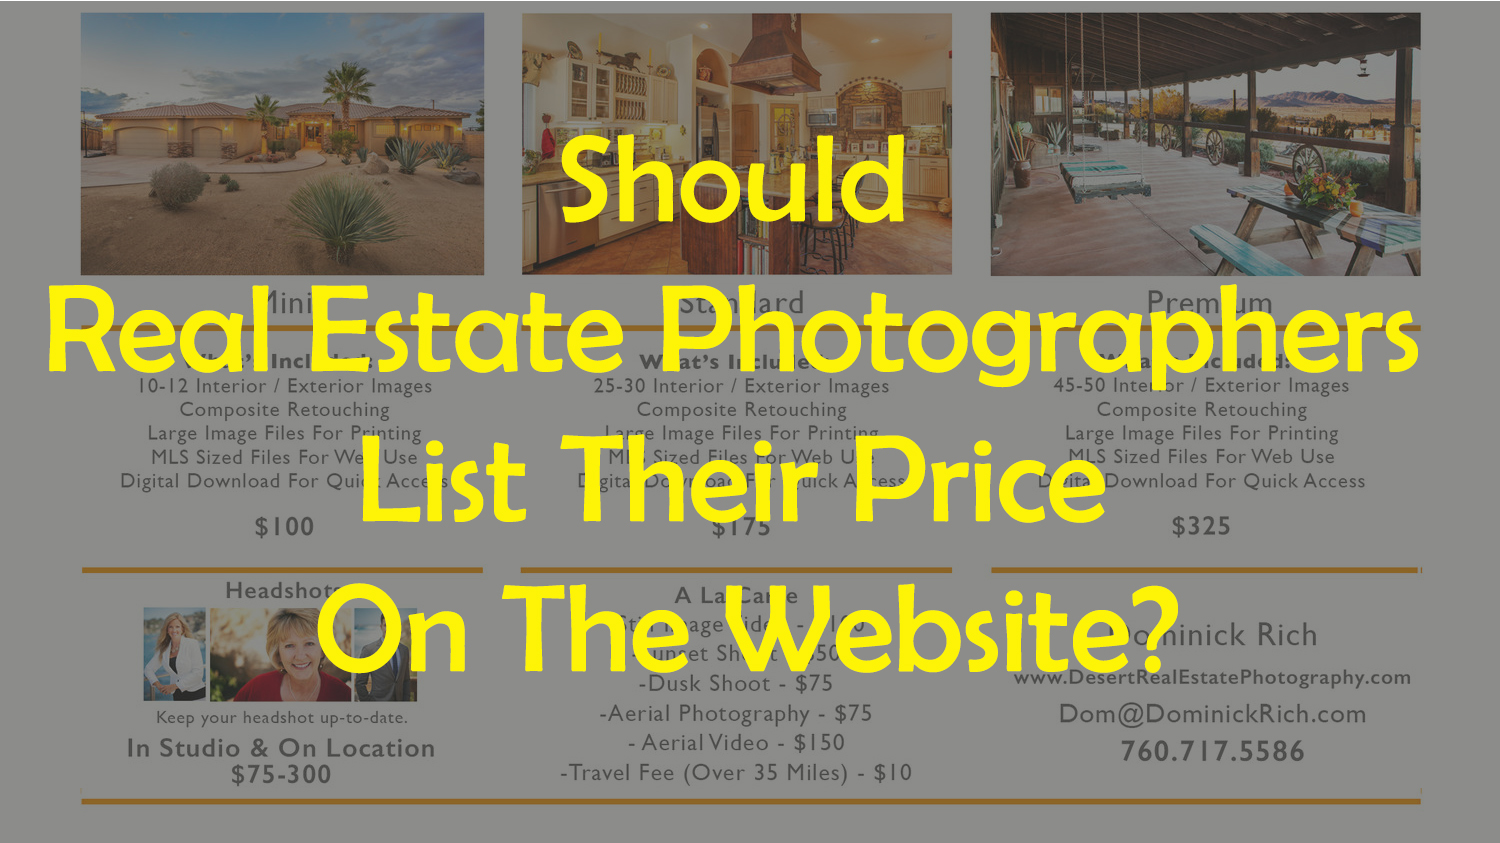 beatcolor-should-real-estate-photographers-list-their-price-on-the